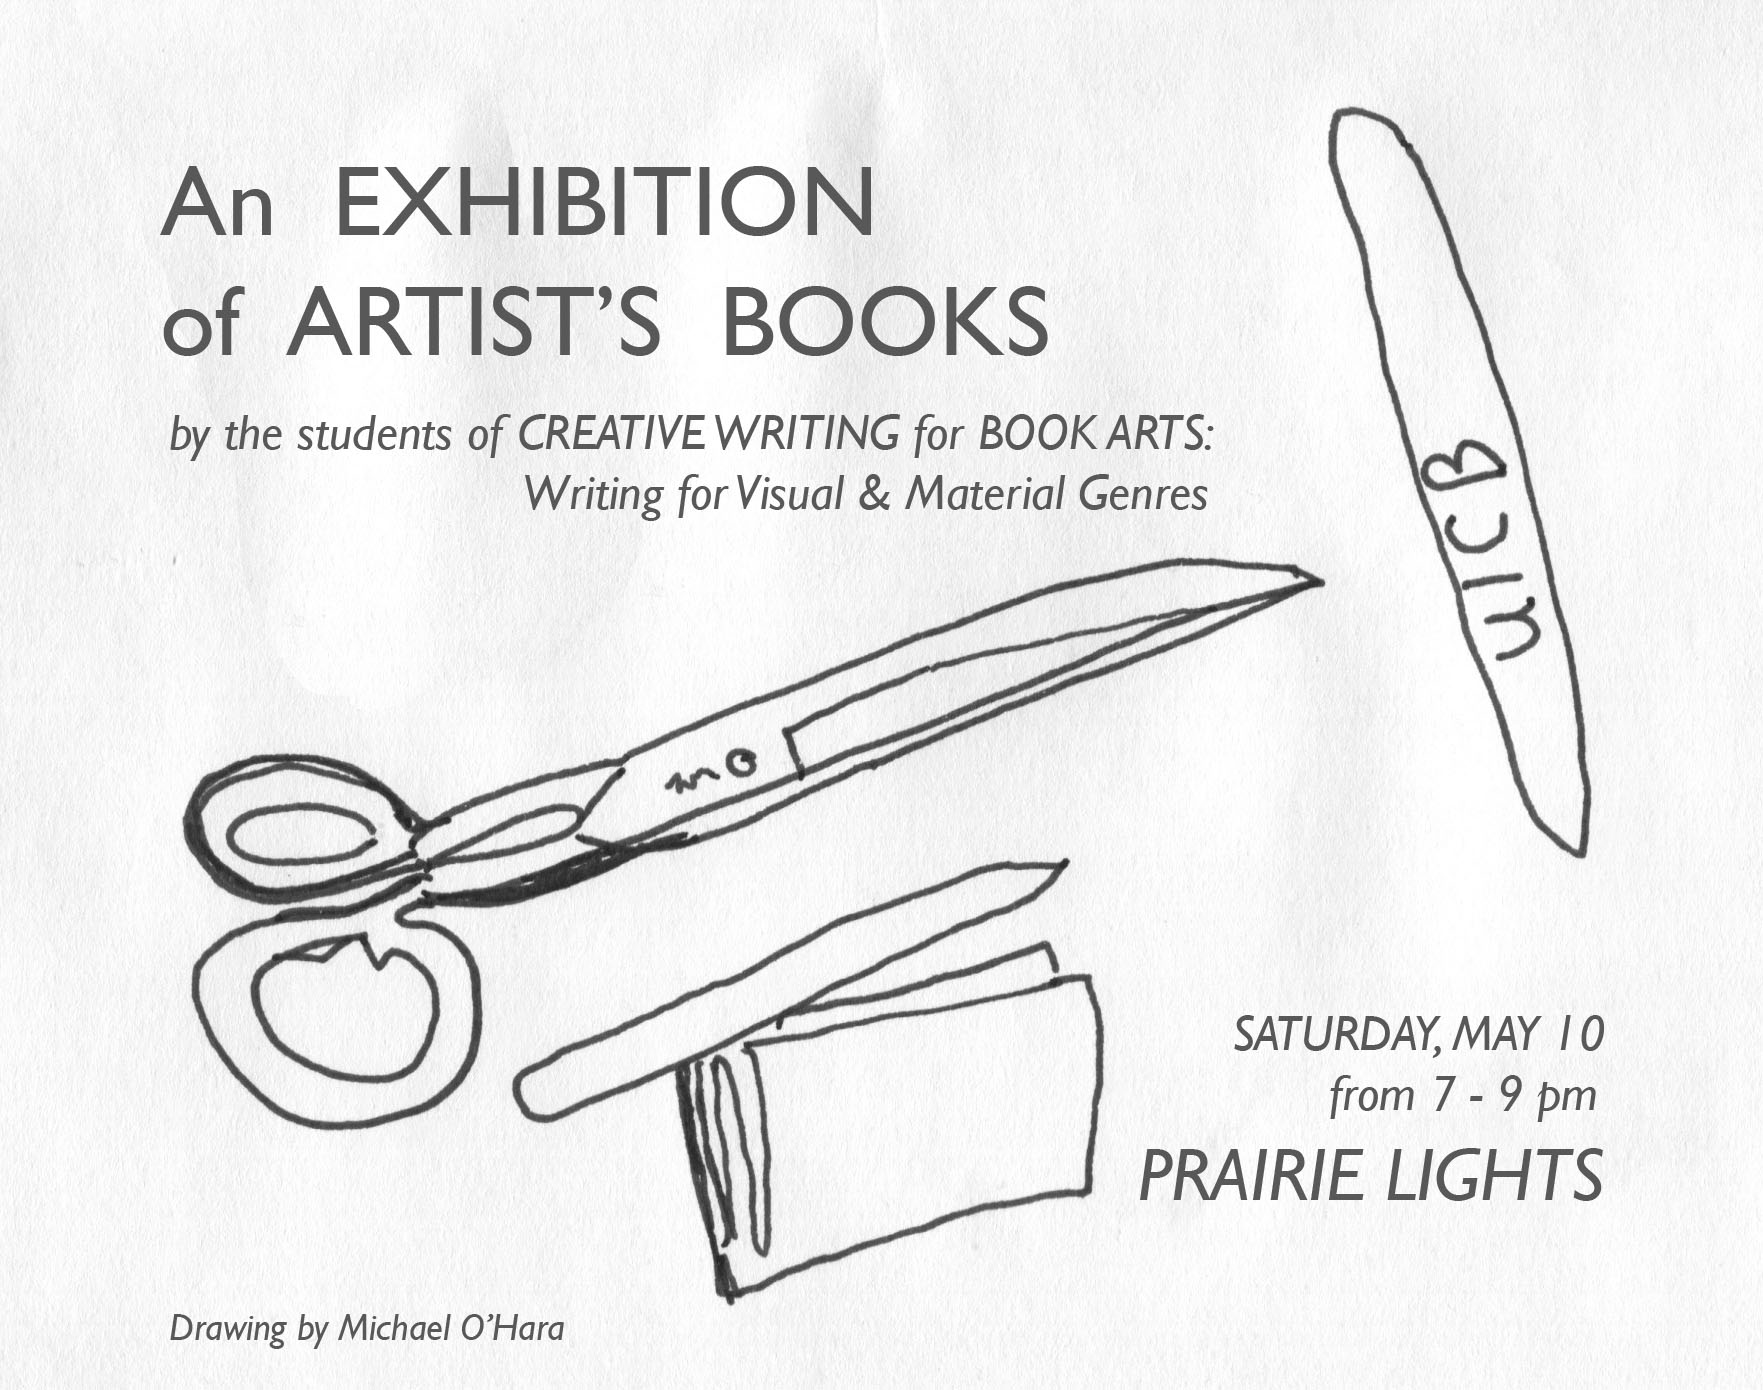 An EXHIBITION of ARTIST'S BOOKS